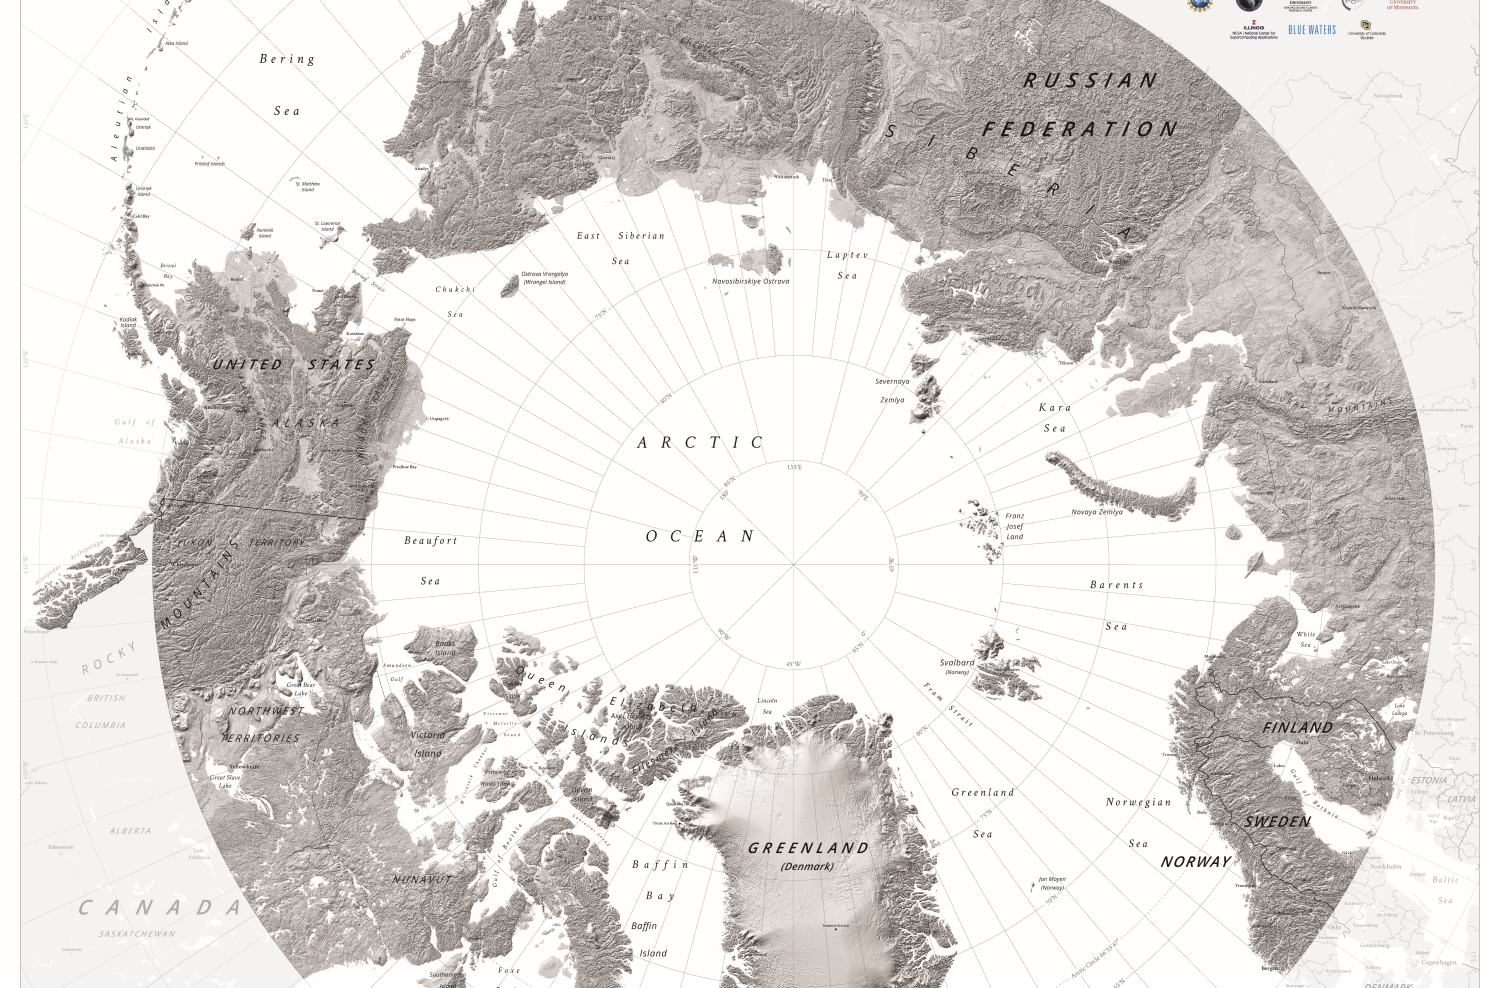 Topographic greyscale map of the Arctic Ocean and surrounding North America, Europe and Asia land masses